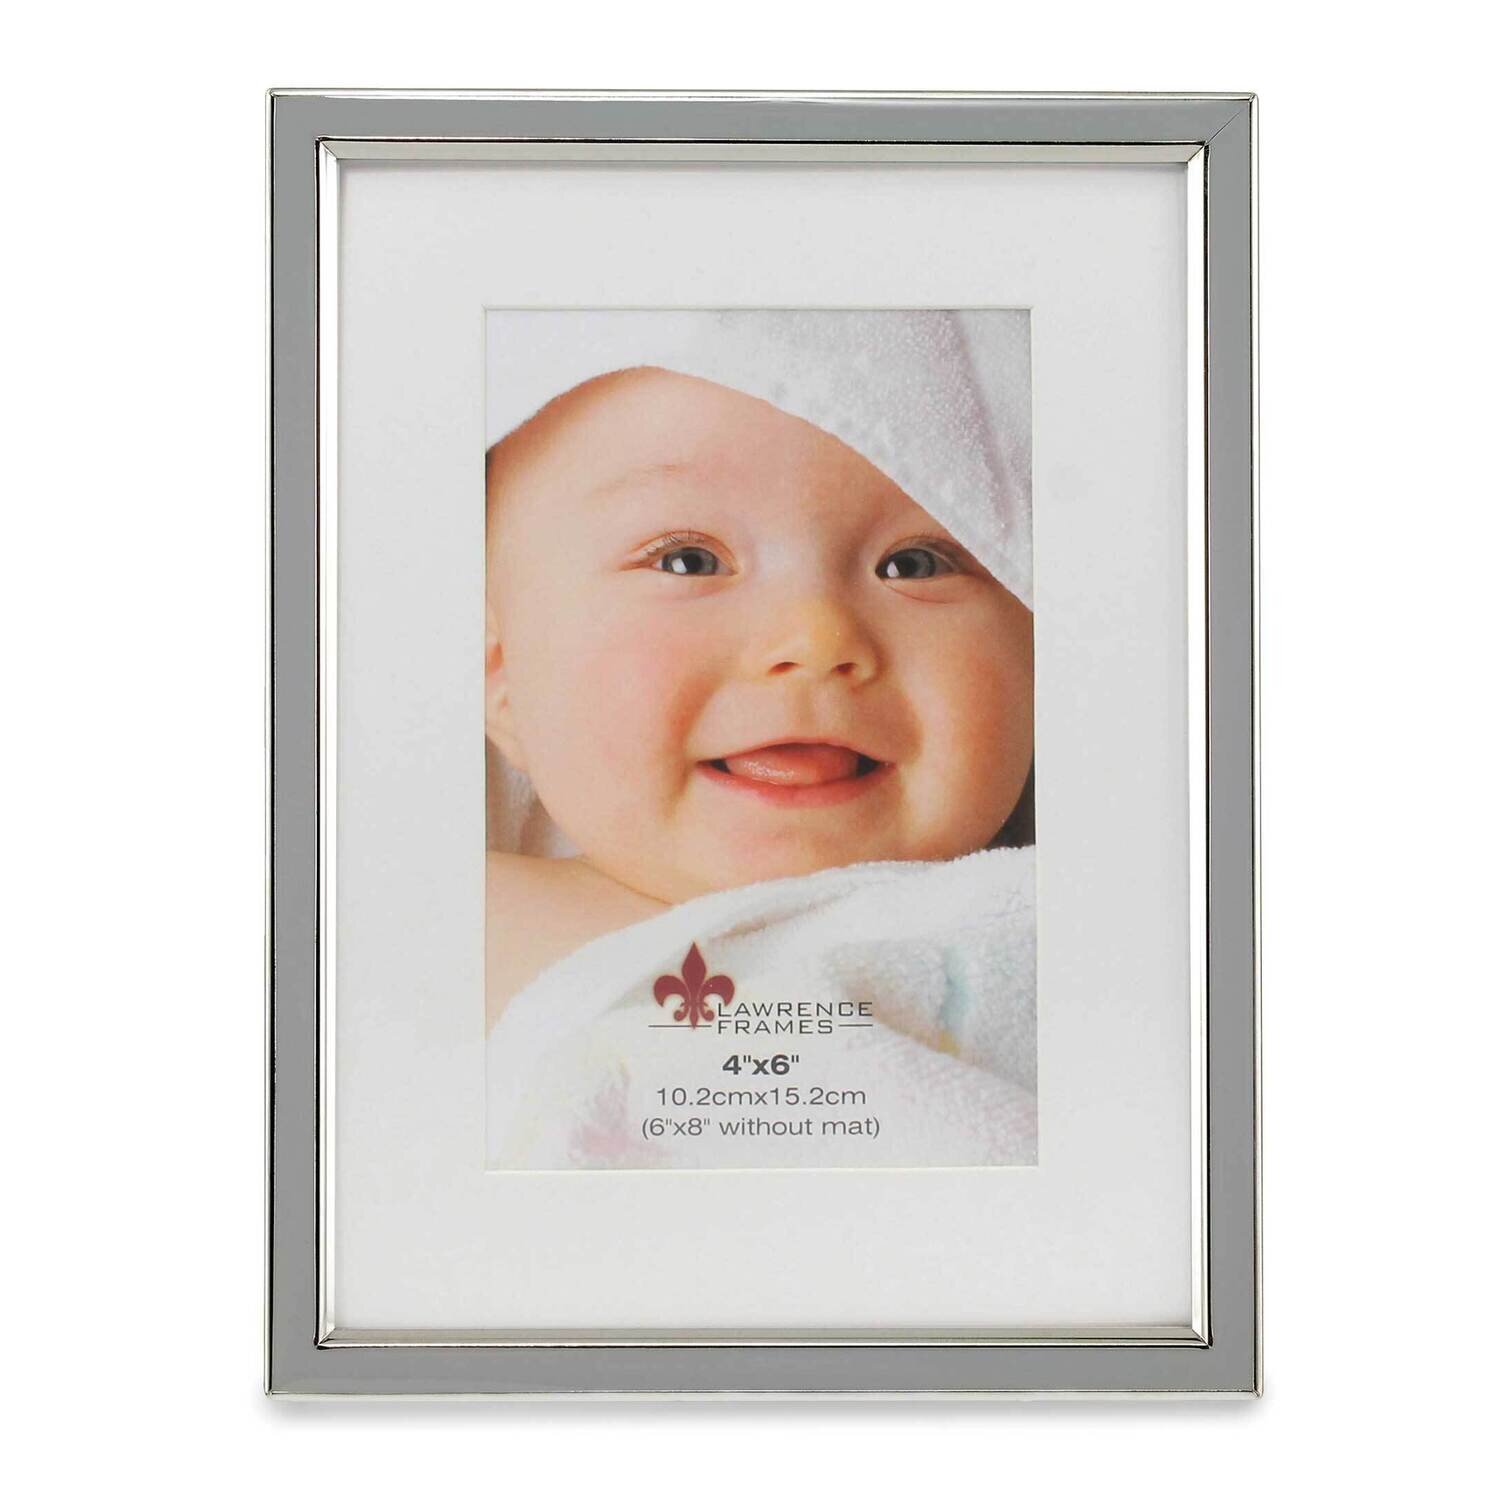 4 x 6 Inch Matted Gray Enamel and Silver-tone Metal Picture Frame 6 x8 with o Mat GM22276